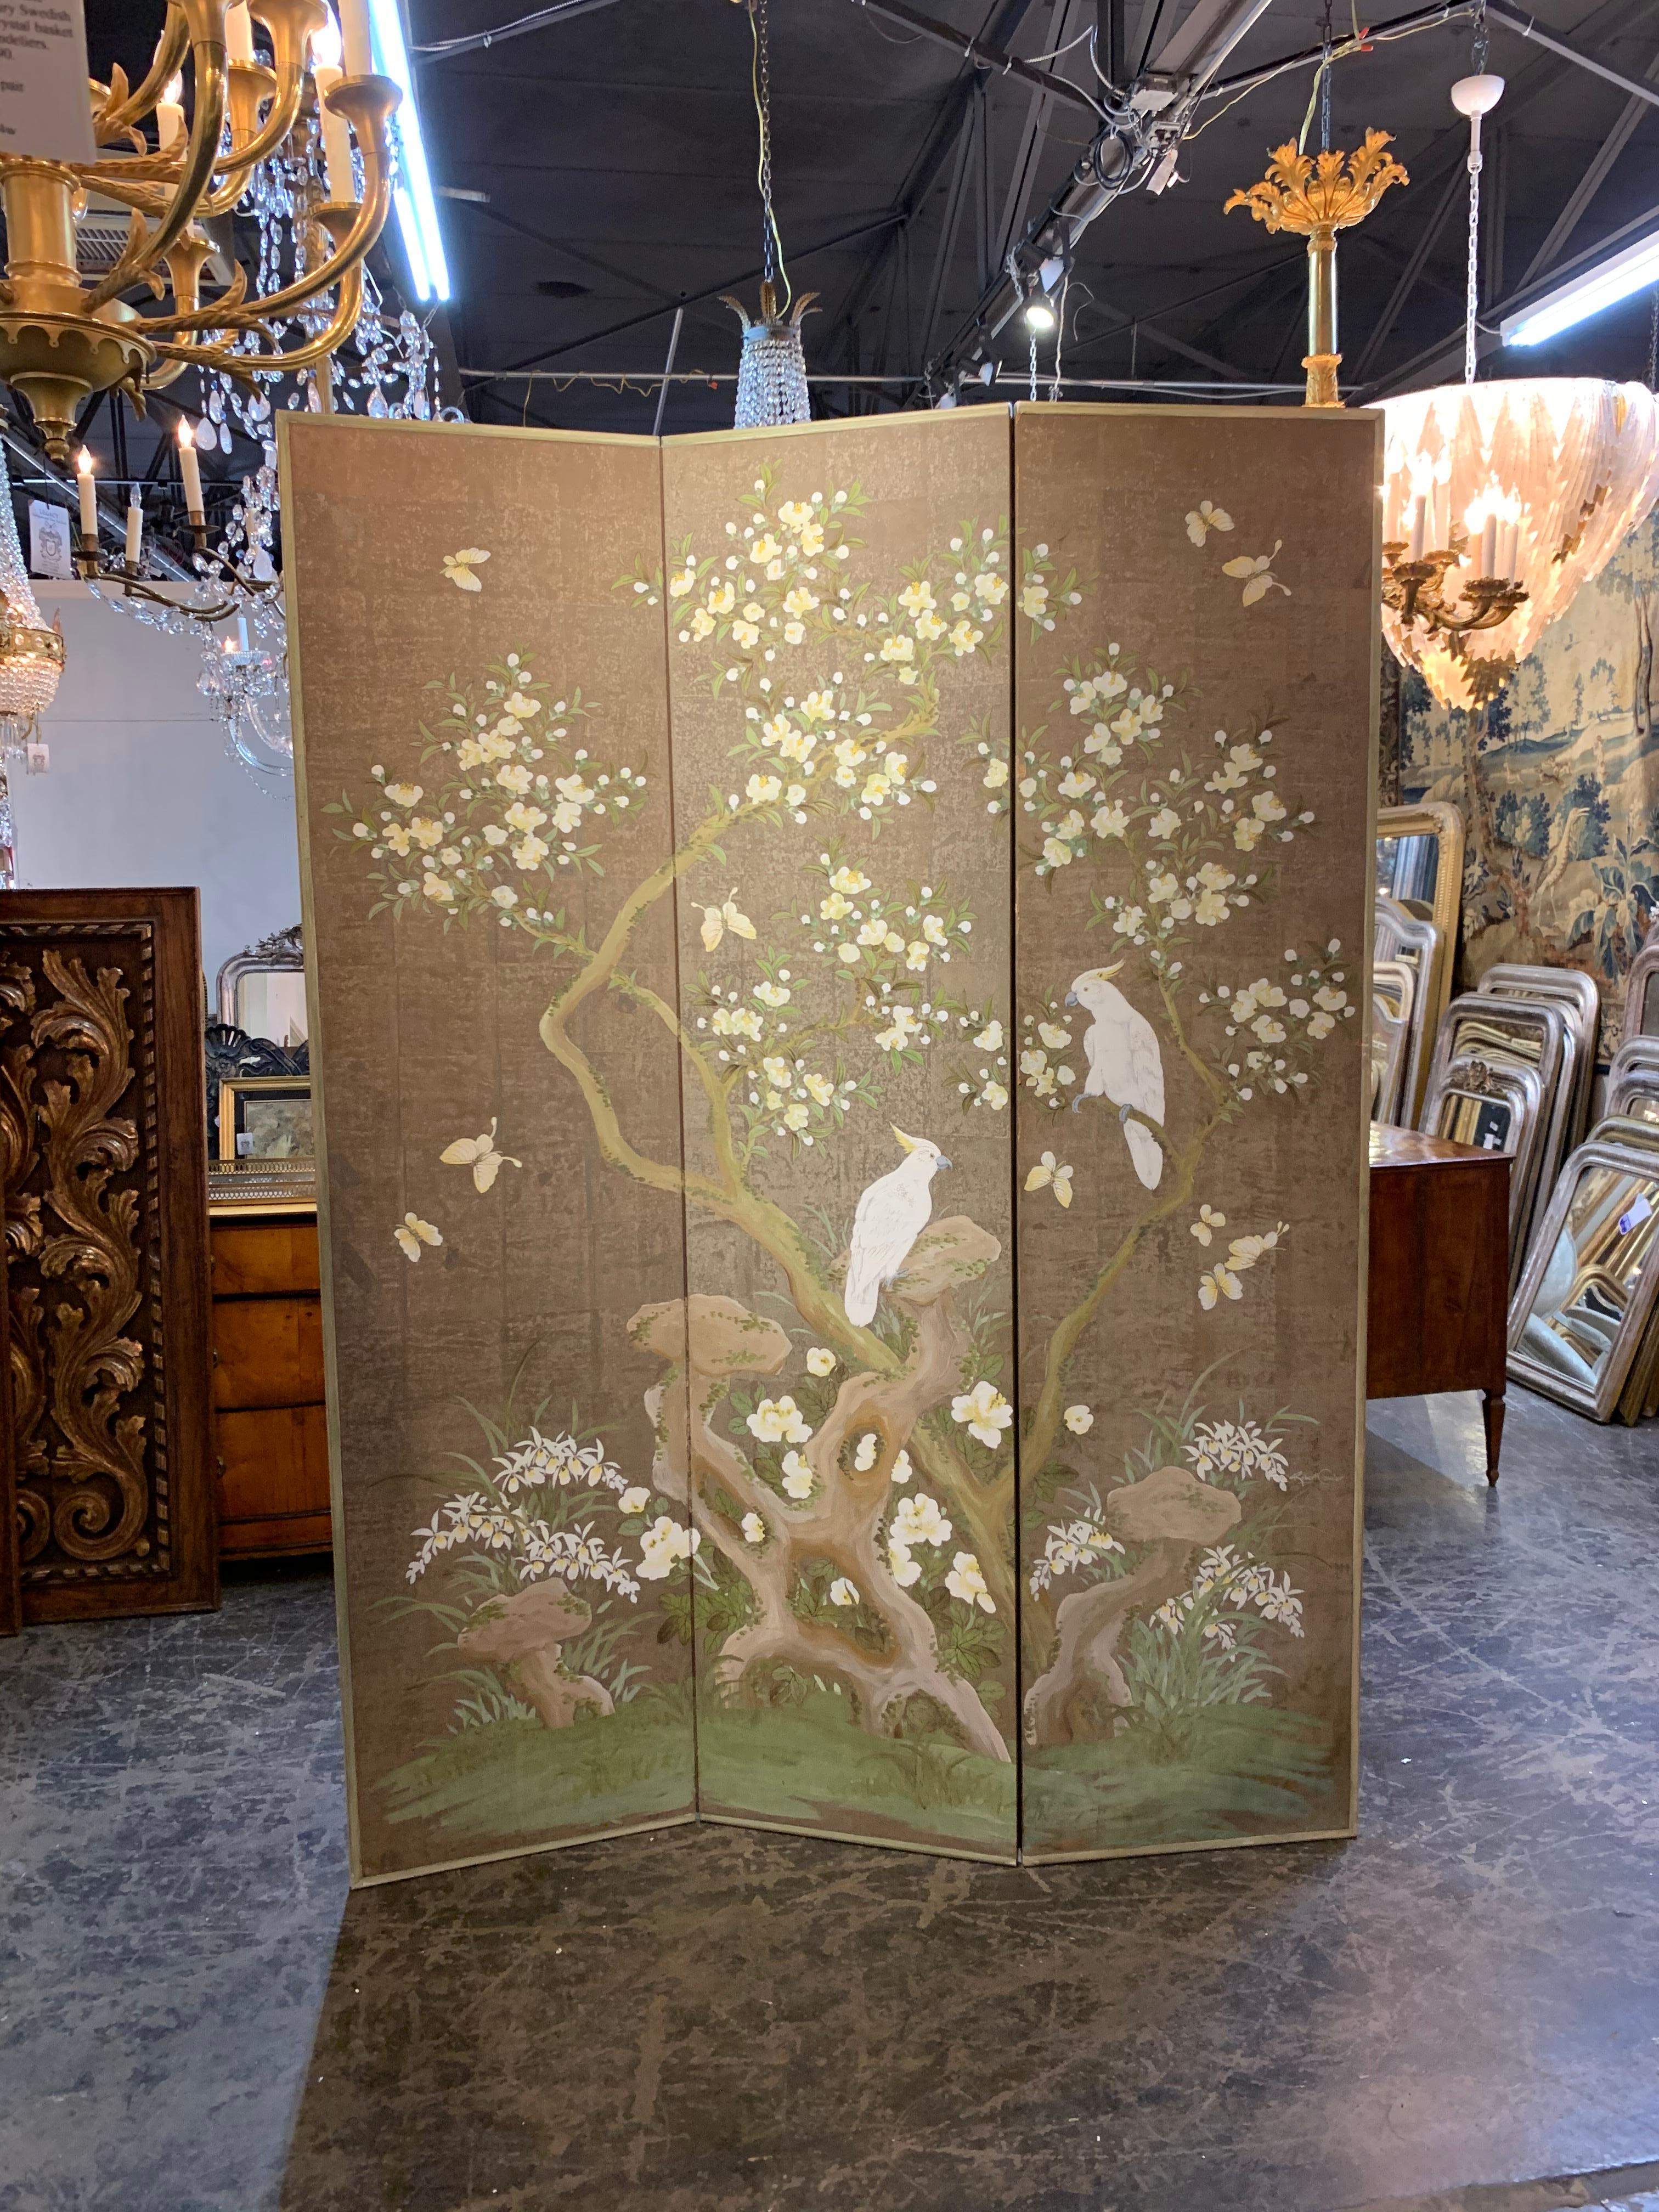 Gorgeous hand painted screen by artist Robert Crowder. Featuring beautiful birds and flowers. A stunning work of art!